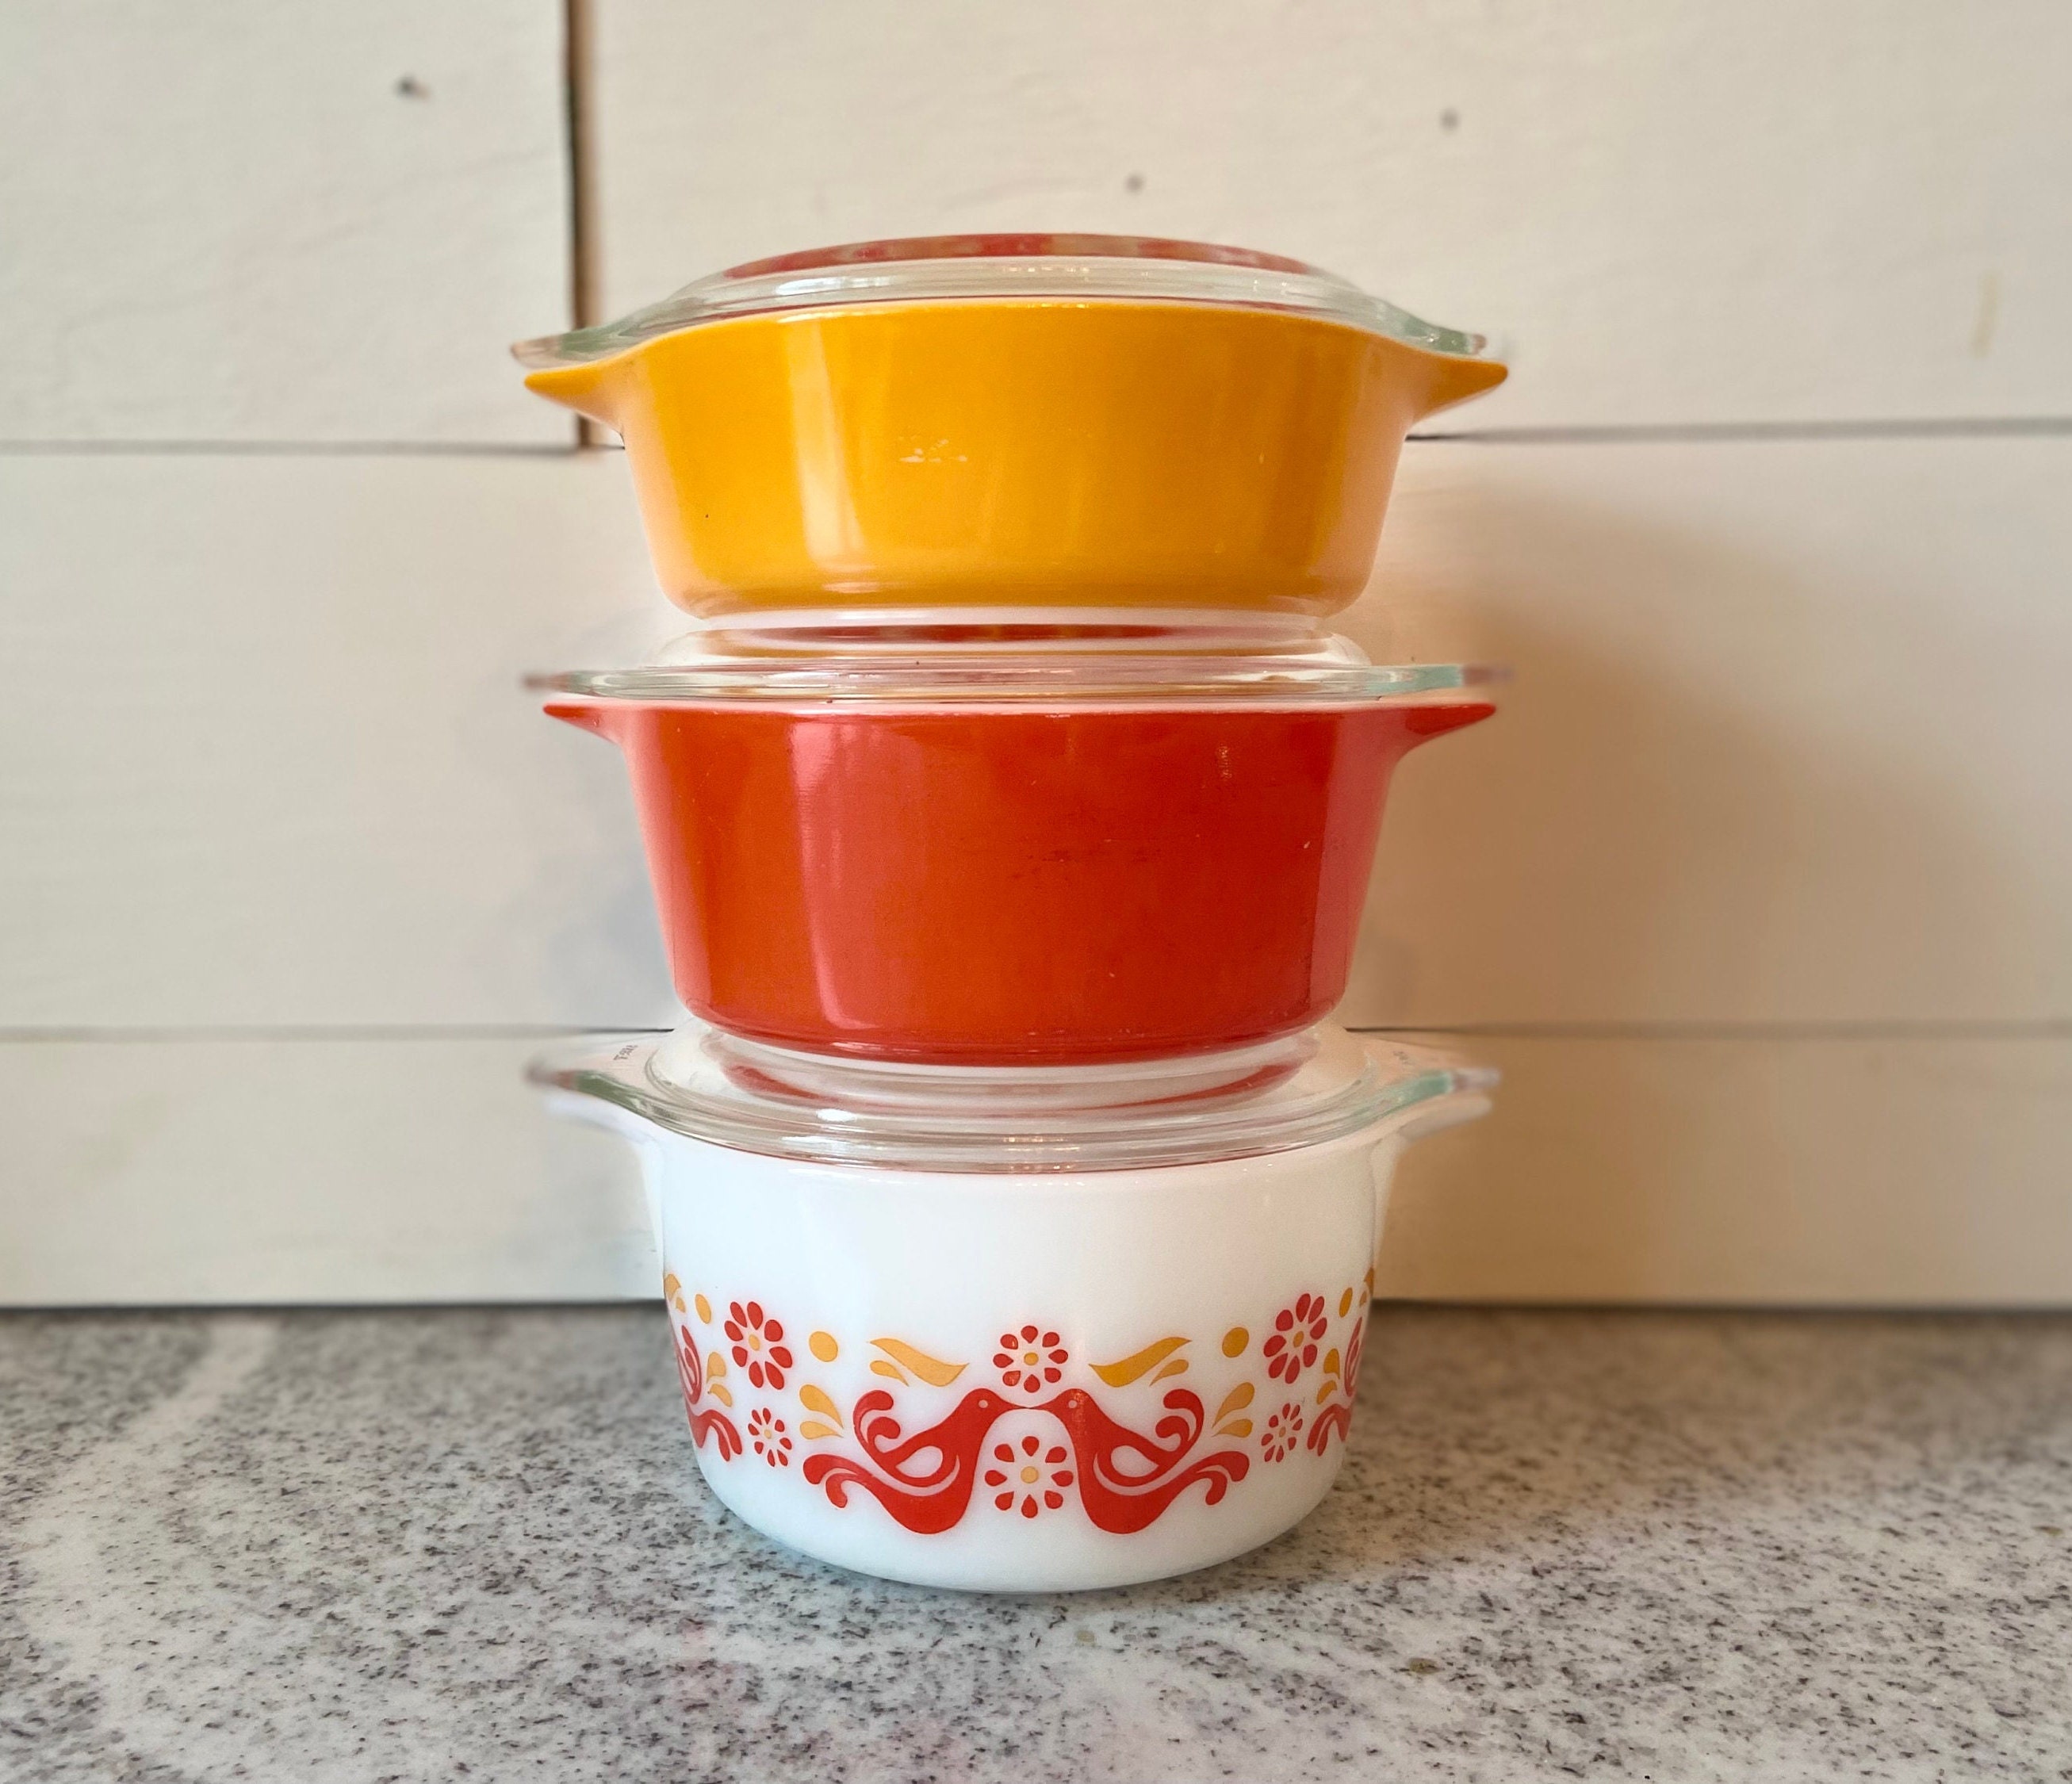 Pyrex 22pc Glass Food Storage Container Set Red/Orange